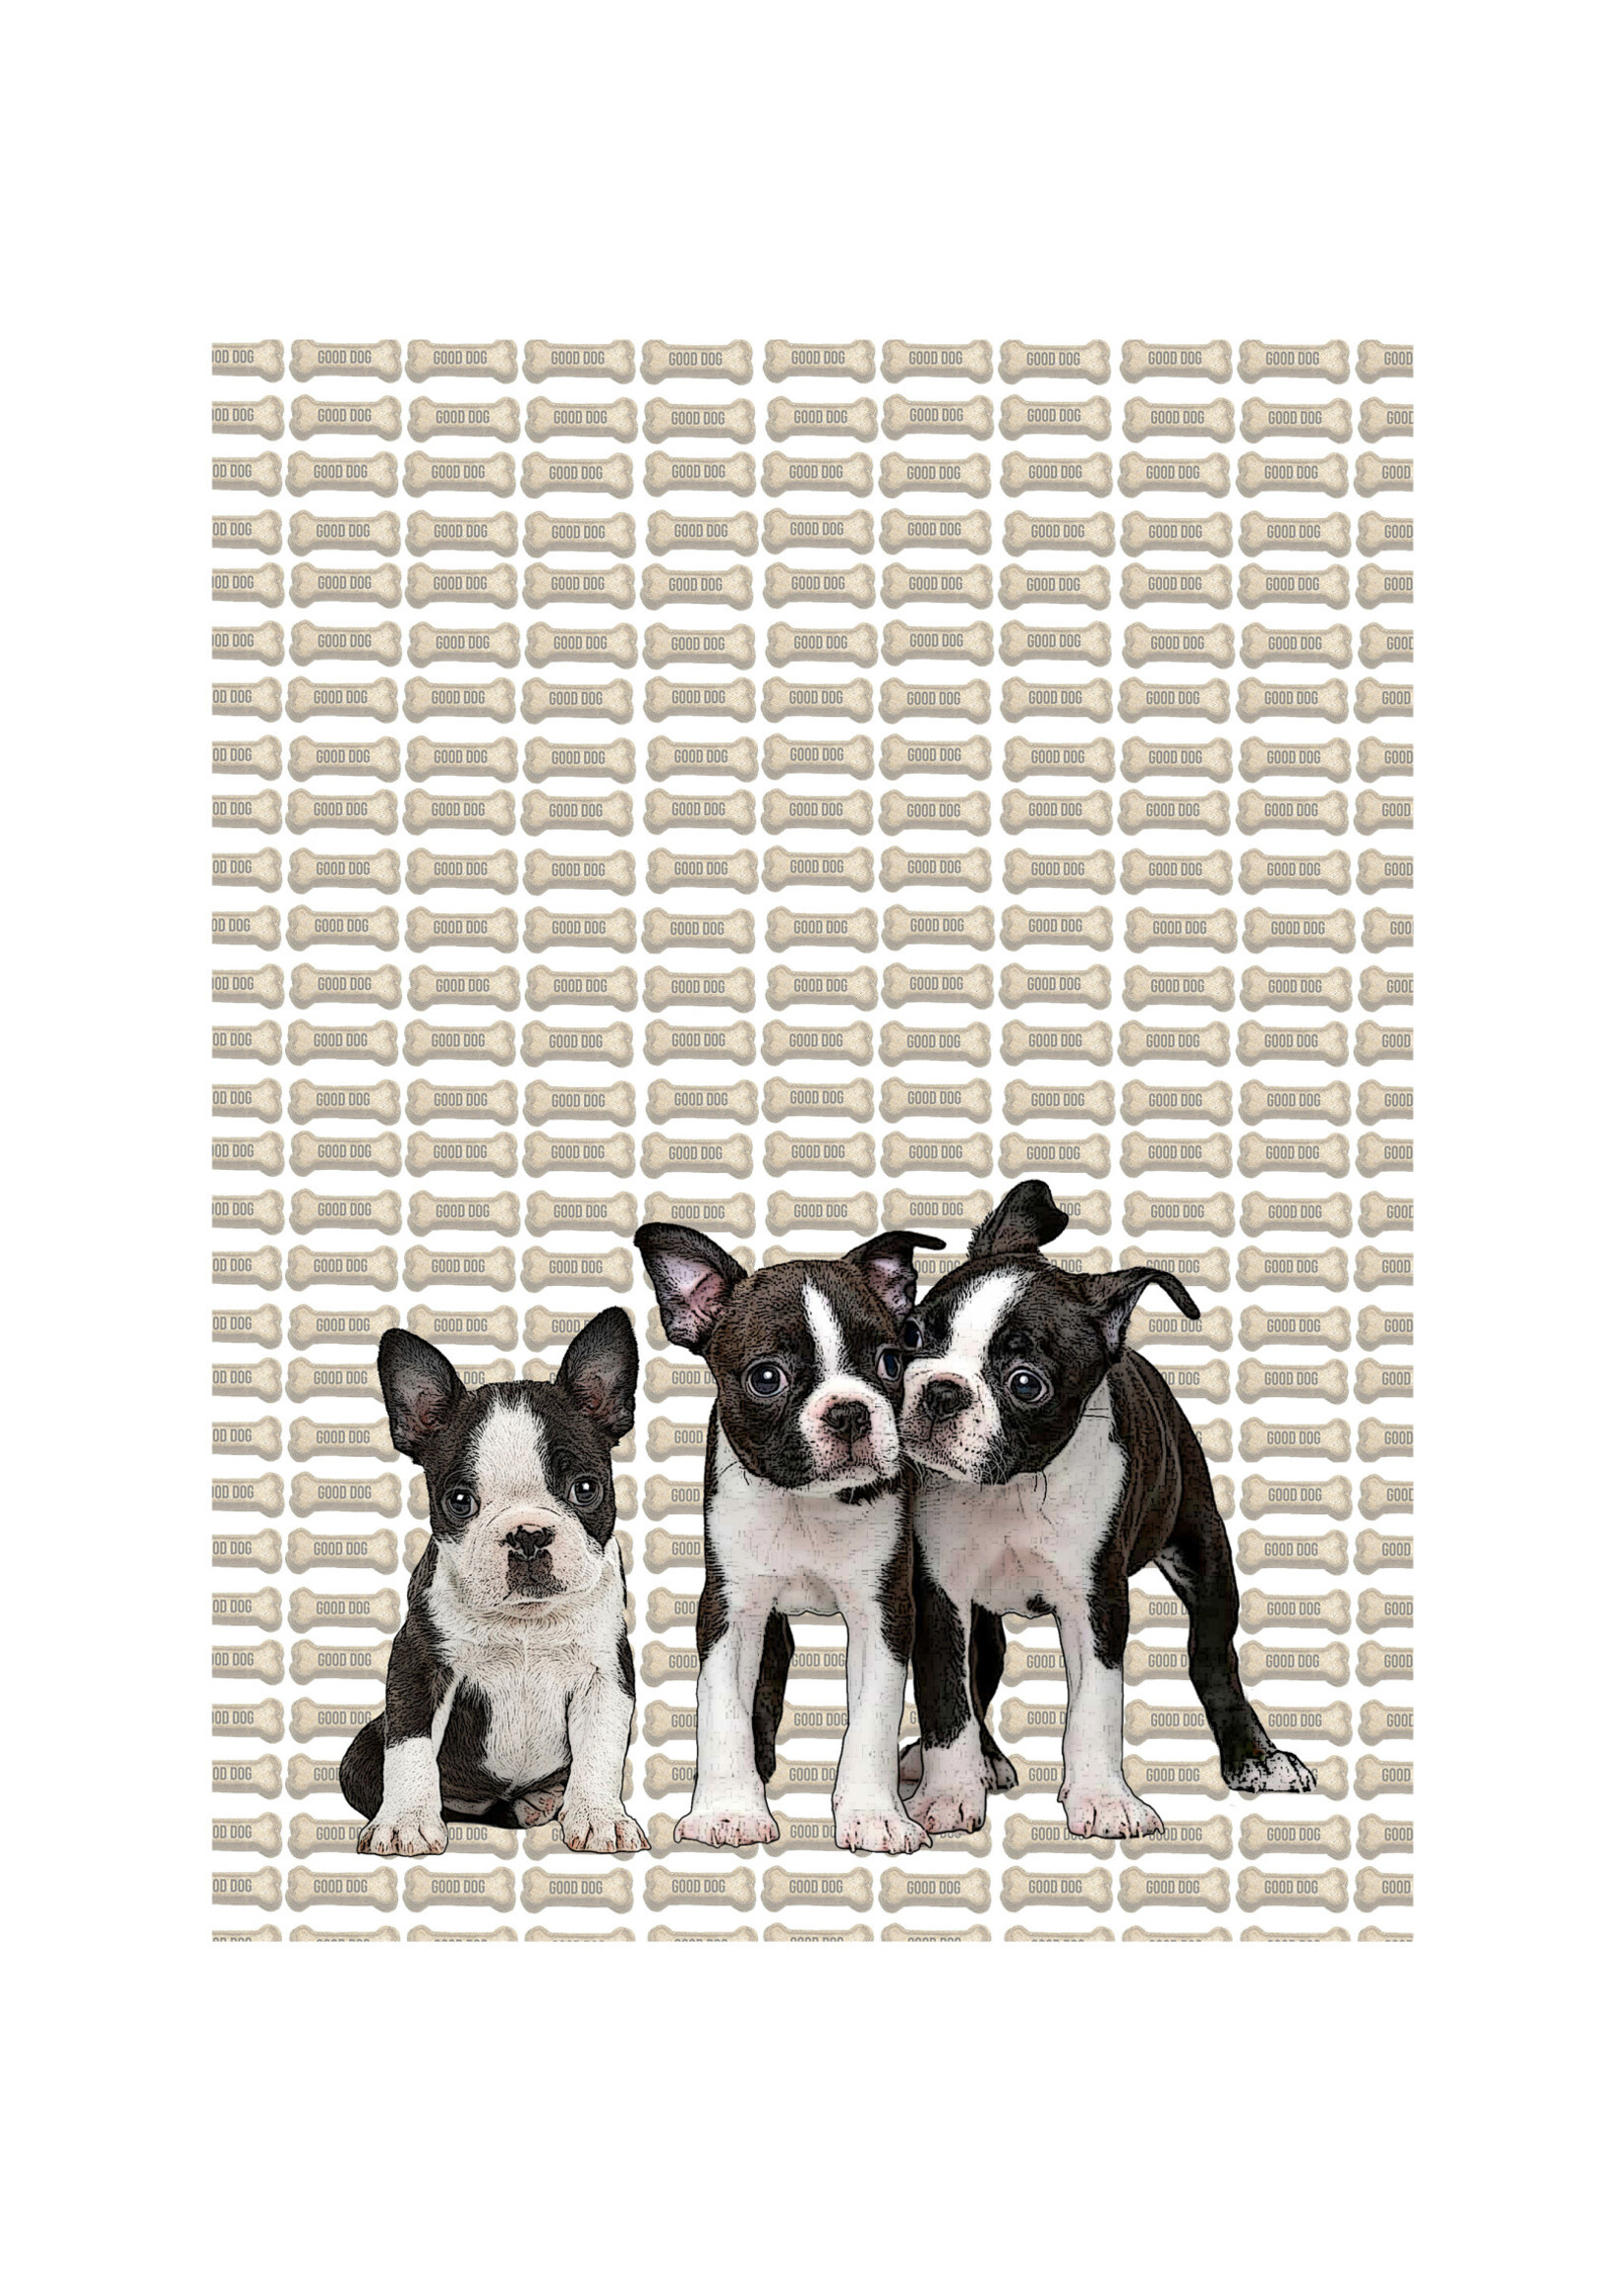 Alphie and Ollie boston terrier puppy kitchen towel 18 x 24 inches flour sack material